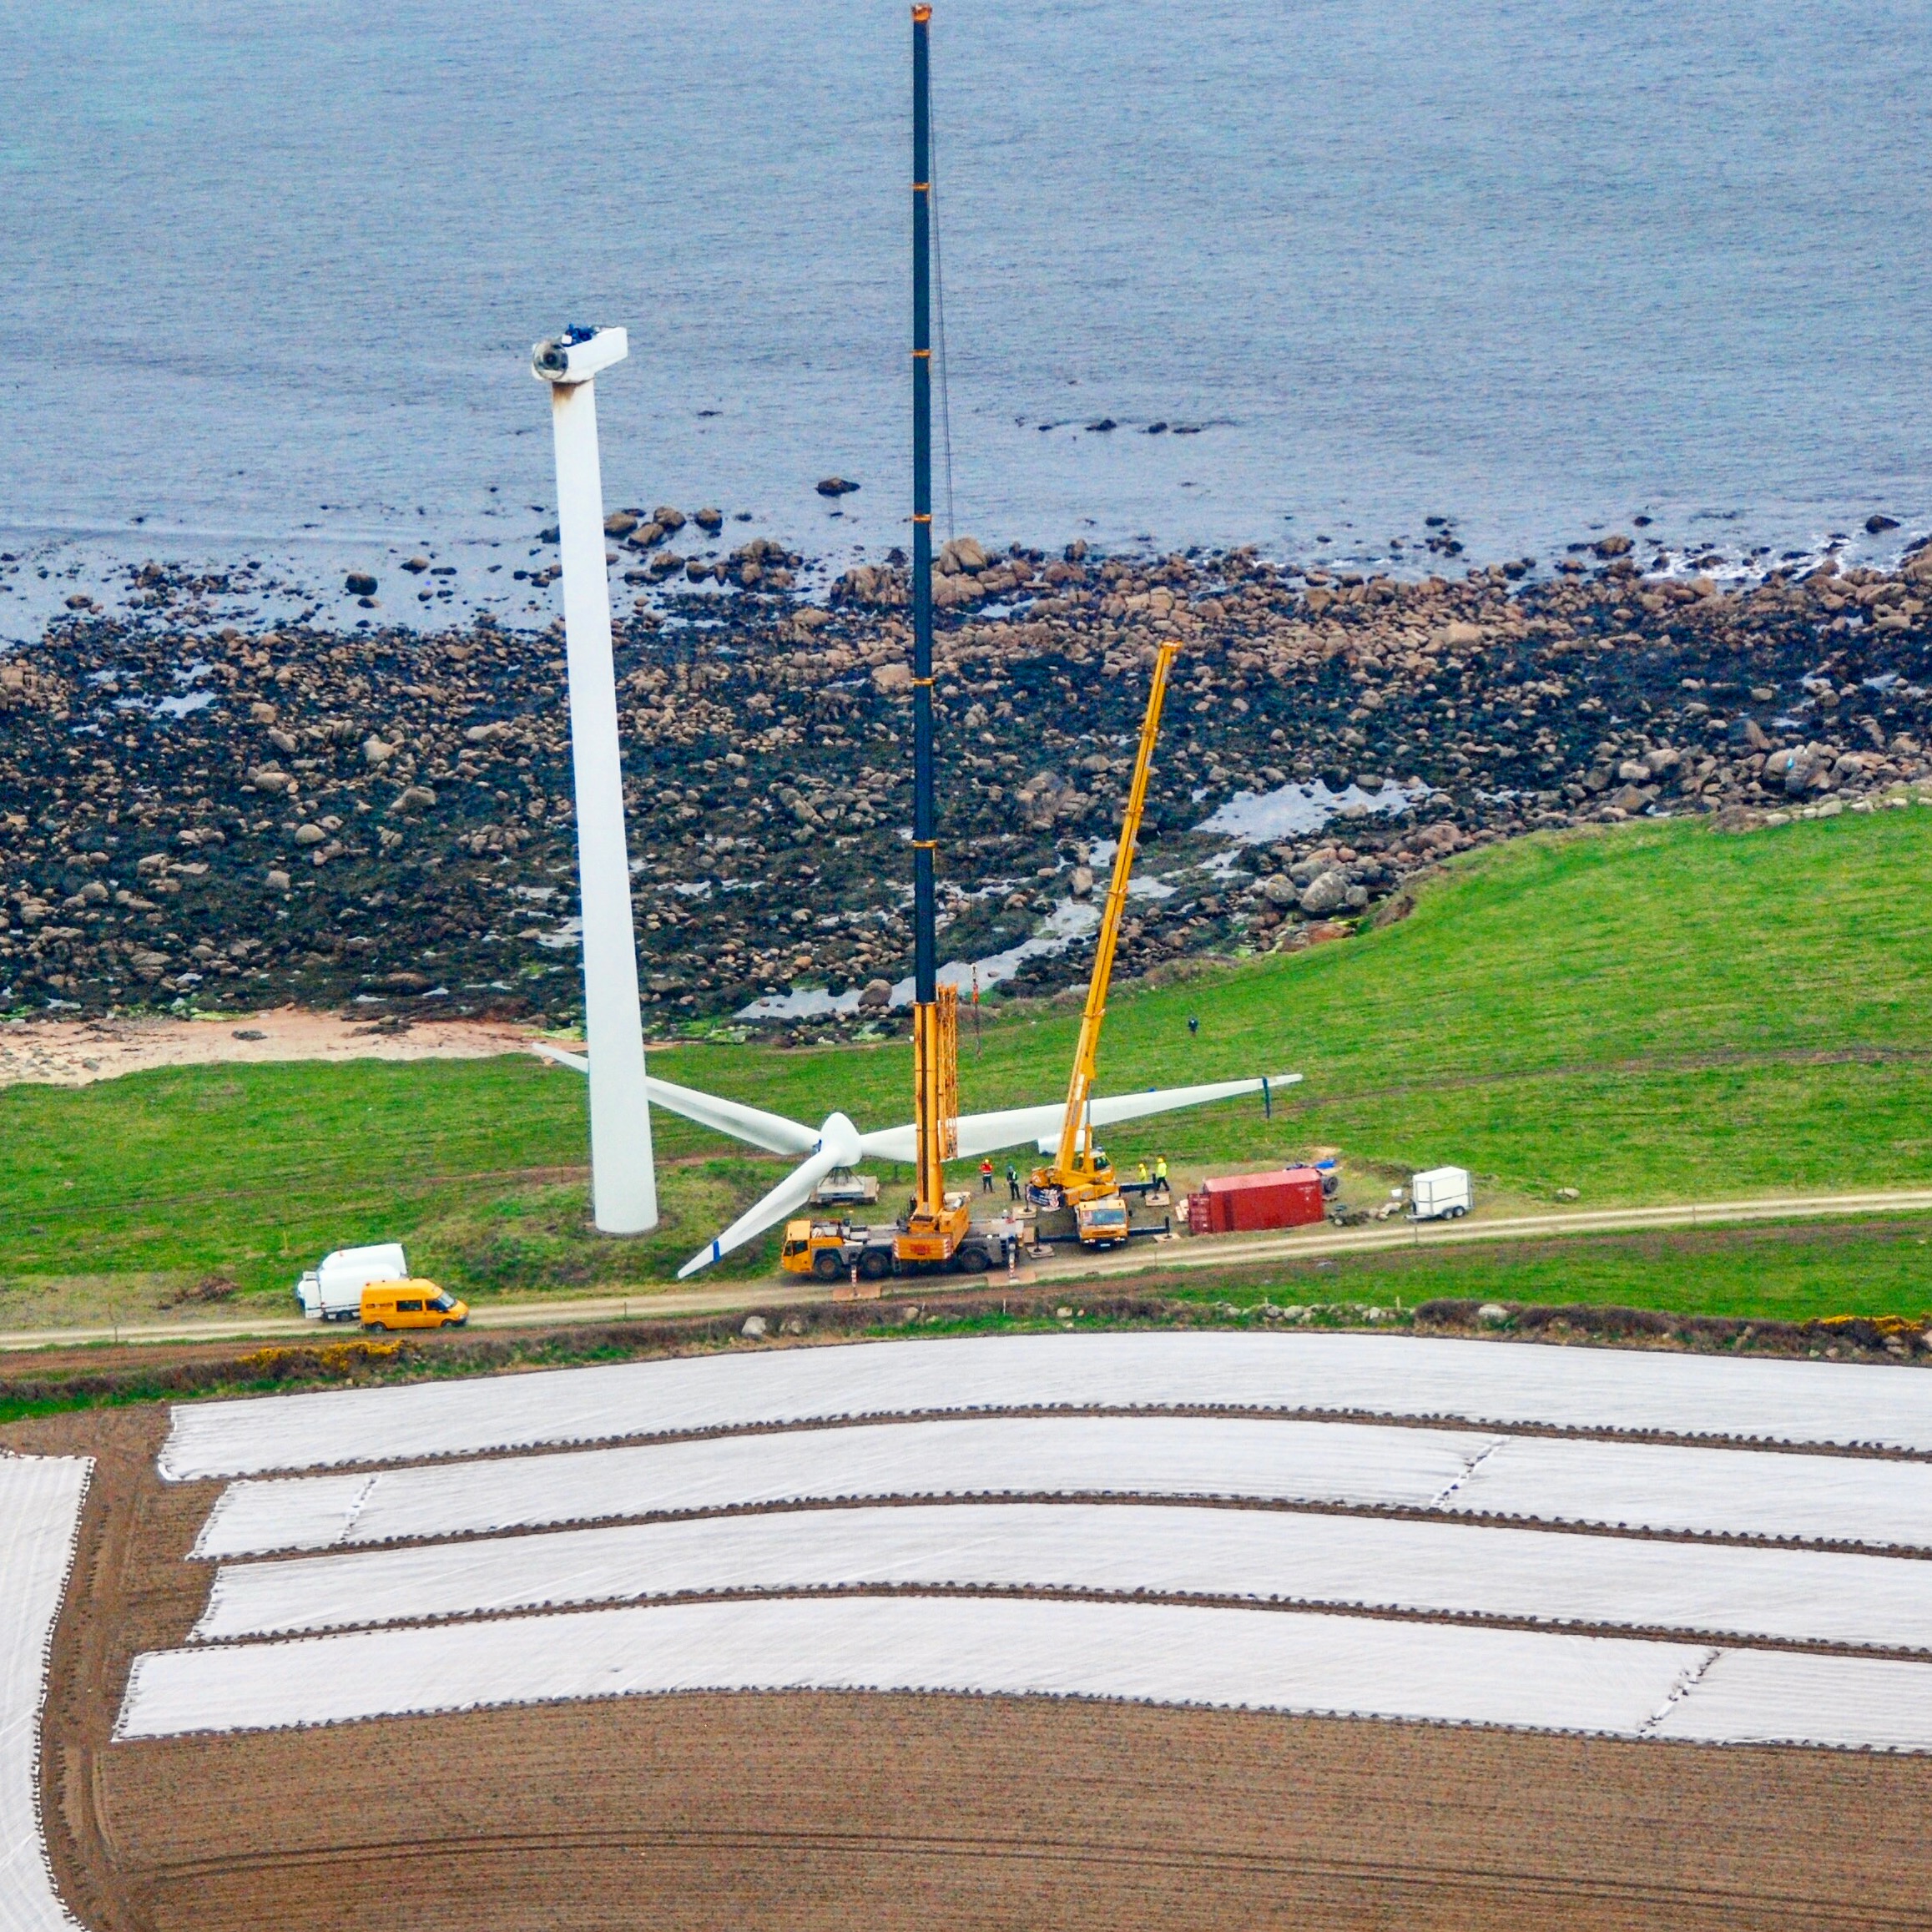 Servicing wind turbines with a 200 tonne crane, Carnsore Point, Co.Wexford